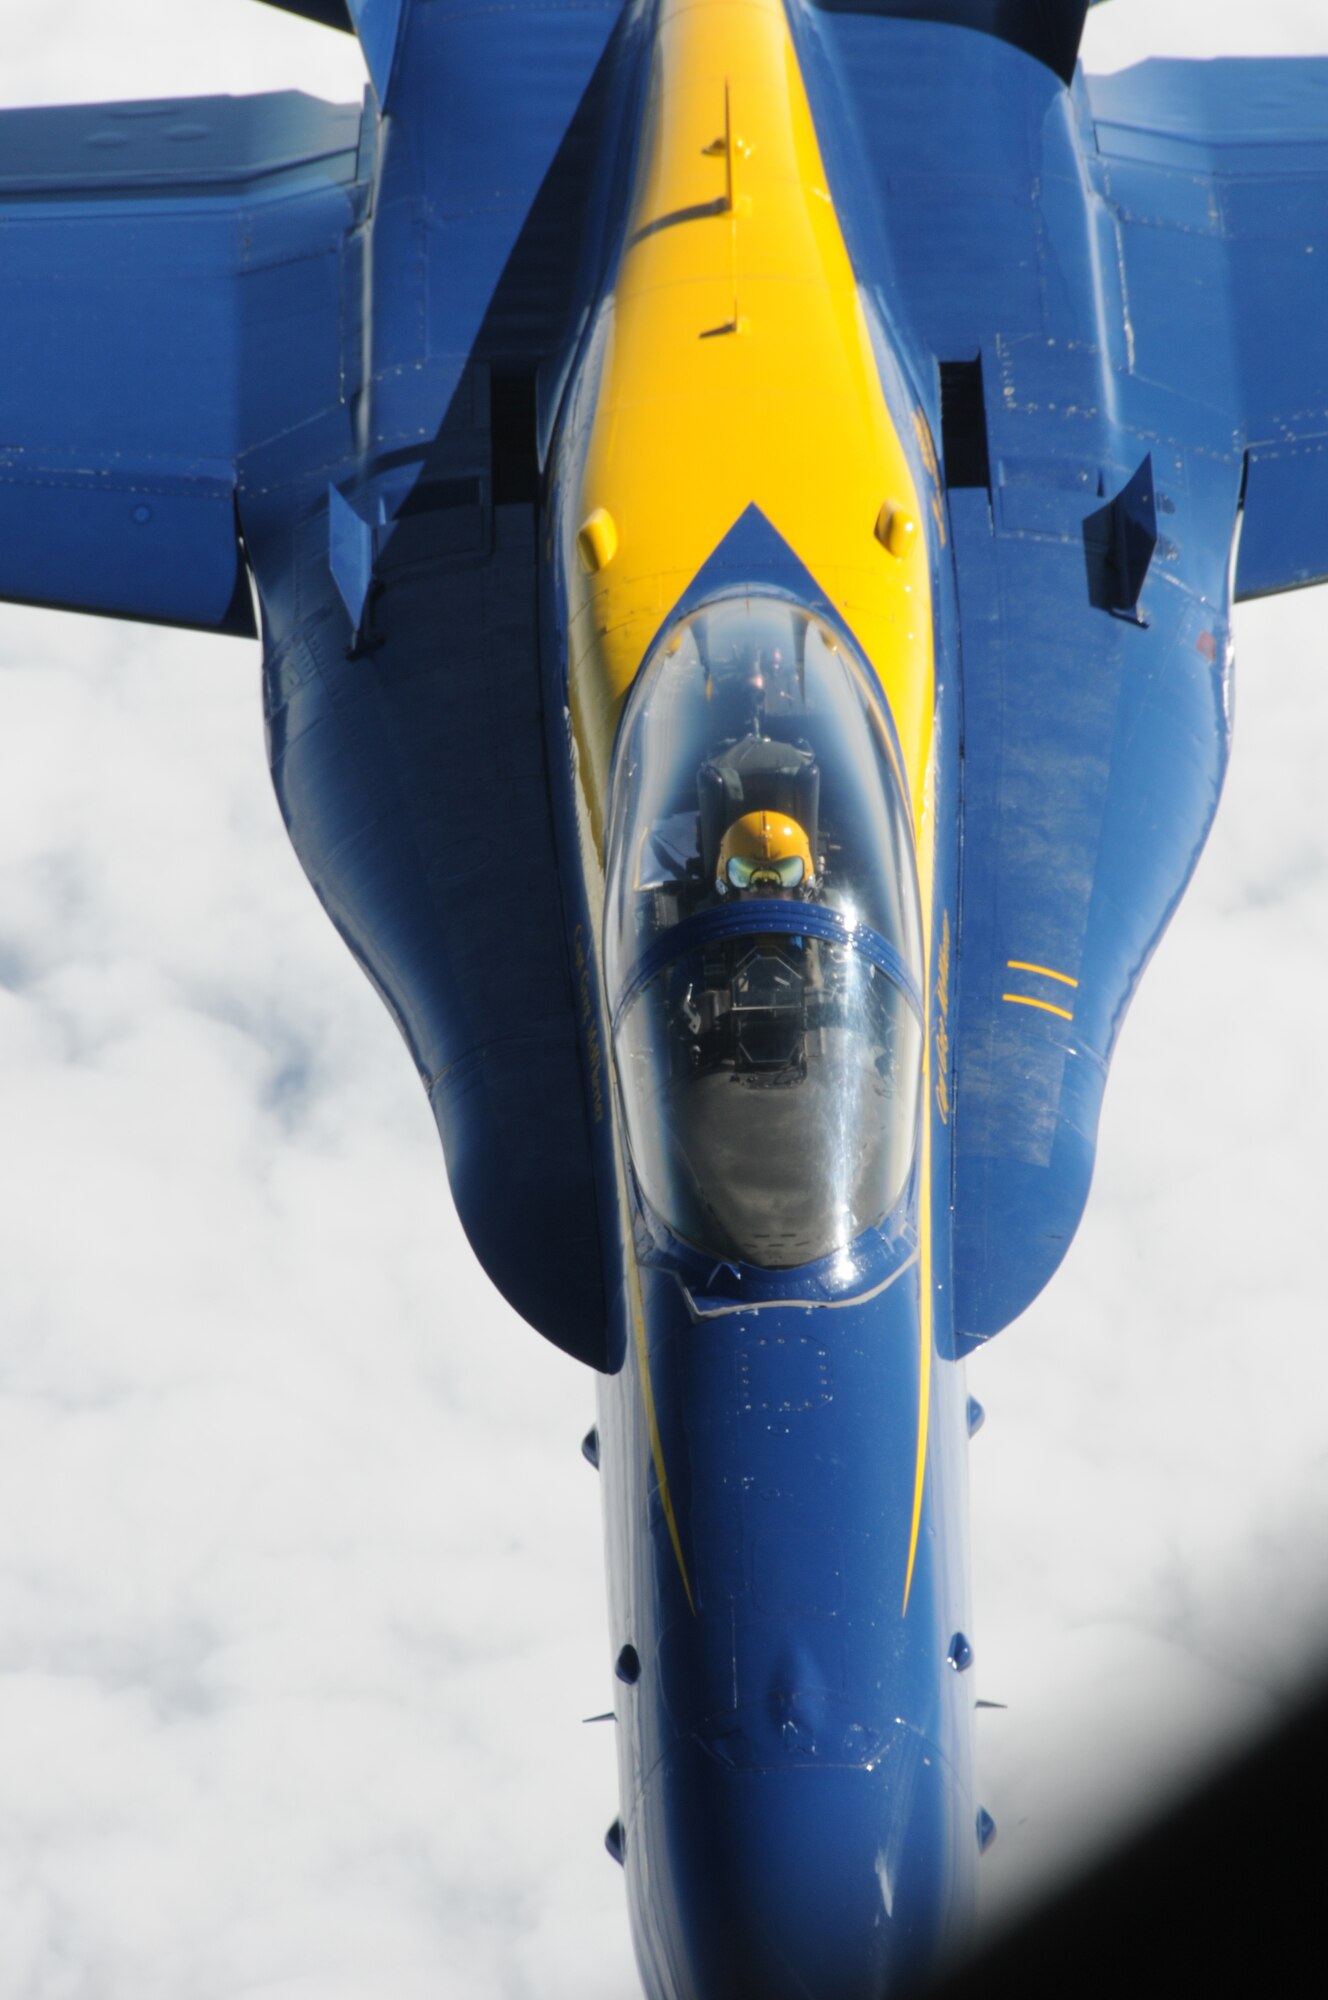 A close-up of  an F/A-18 Hornet belonging to the United States Navy's Flight Demonstration Squadron, the Blue Angels, during a refueling mission over the Eastern United States on August 25, 2010.  The tanker aircraft and crew are from the 157th Air Refueling Wing at Pease Air National Guard Guard Base, New Hampshire. The Blue Angels are headed to the 2010 Boston New-England Airshow at Pease International Airport on August 28th-29th 2010. Although the NH Air National Guard won't be hosting the airshow, they will be providing logistical support to the Blue Angels and other military aircraft. (U.S. Air Force photo/Staff Sgt. Curtis J. Lenz)
